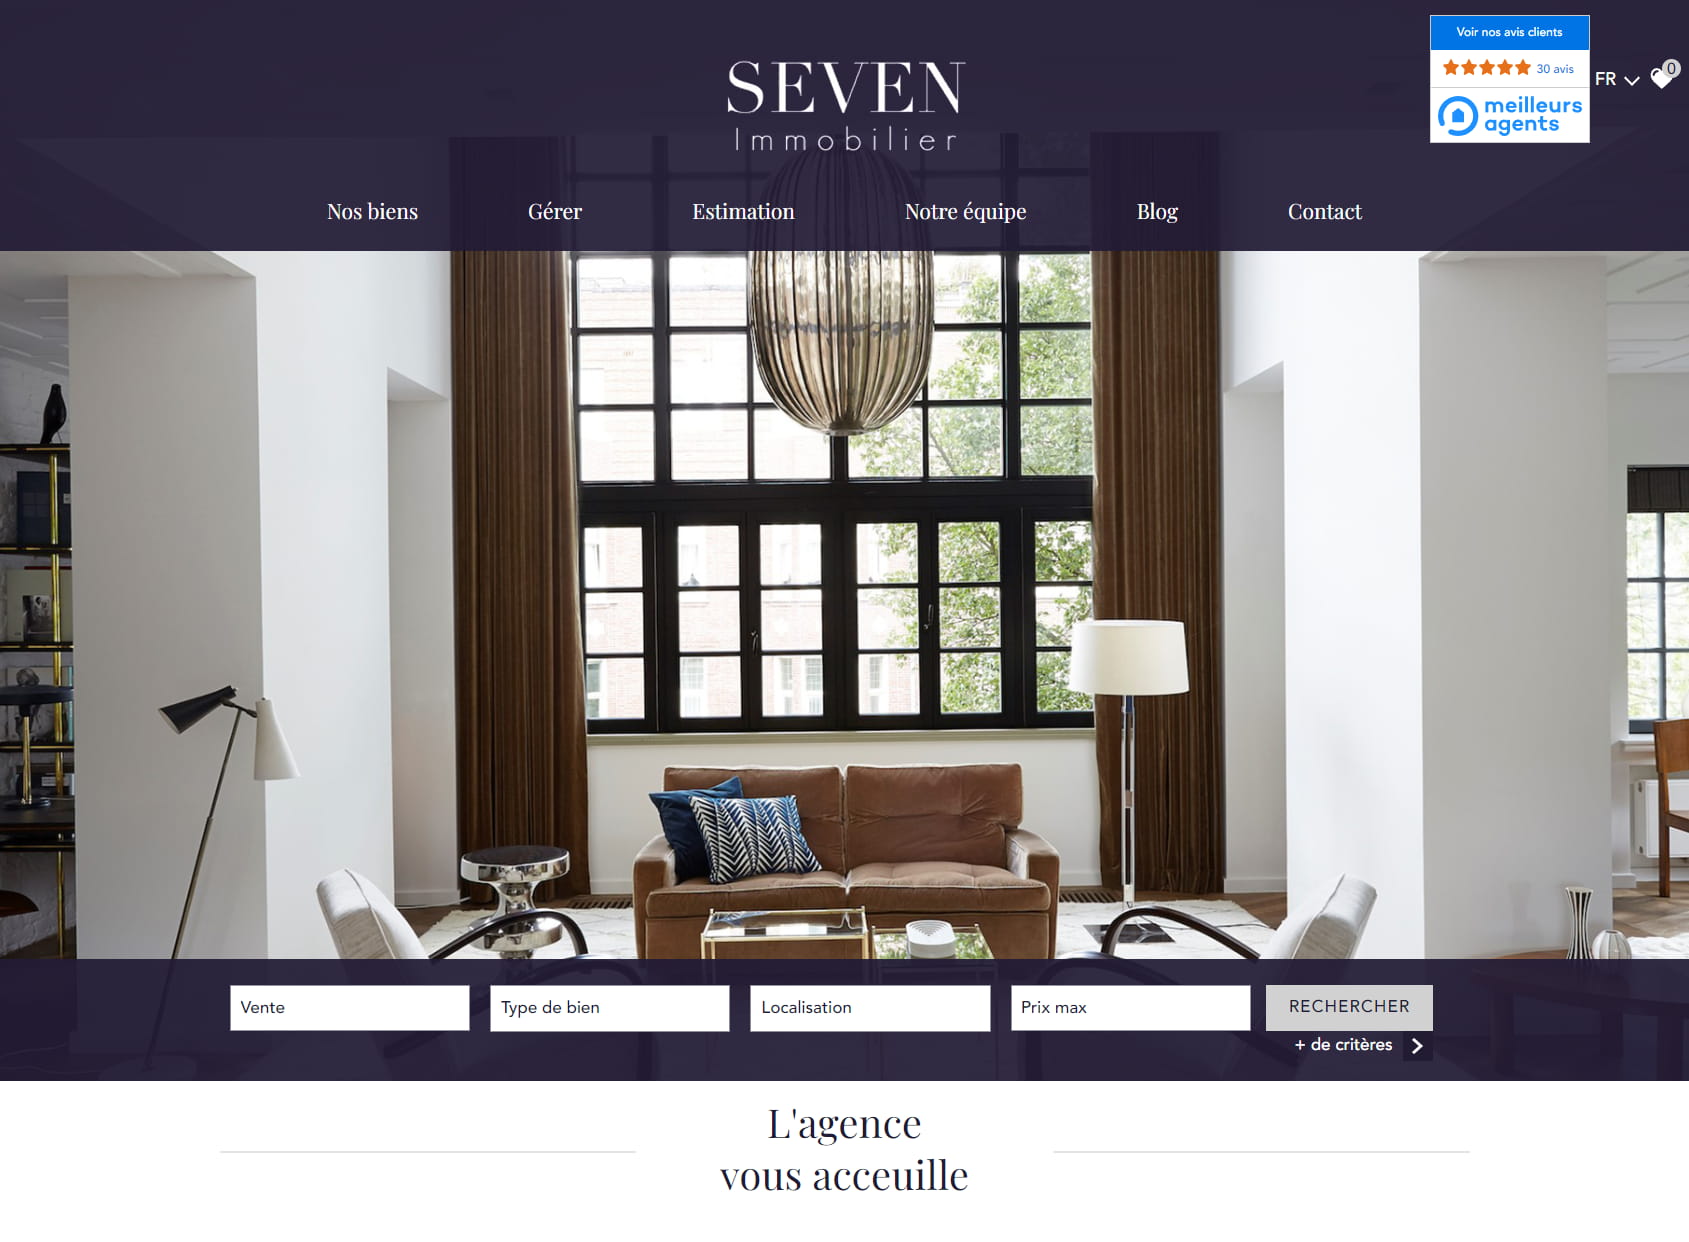 Seven immobilier